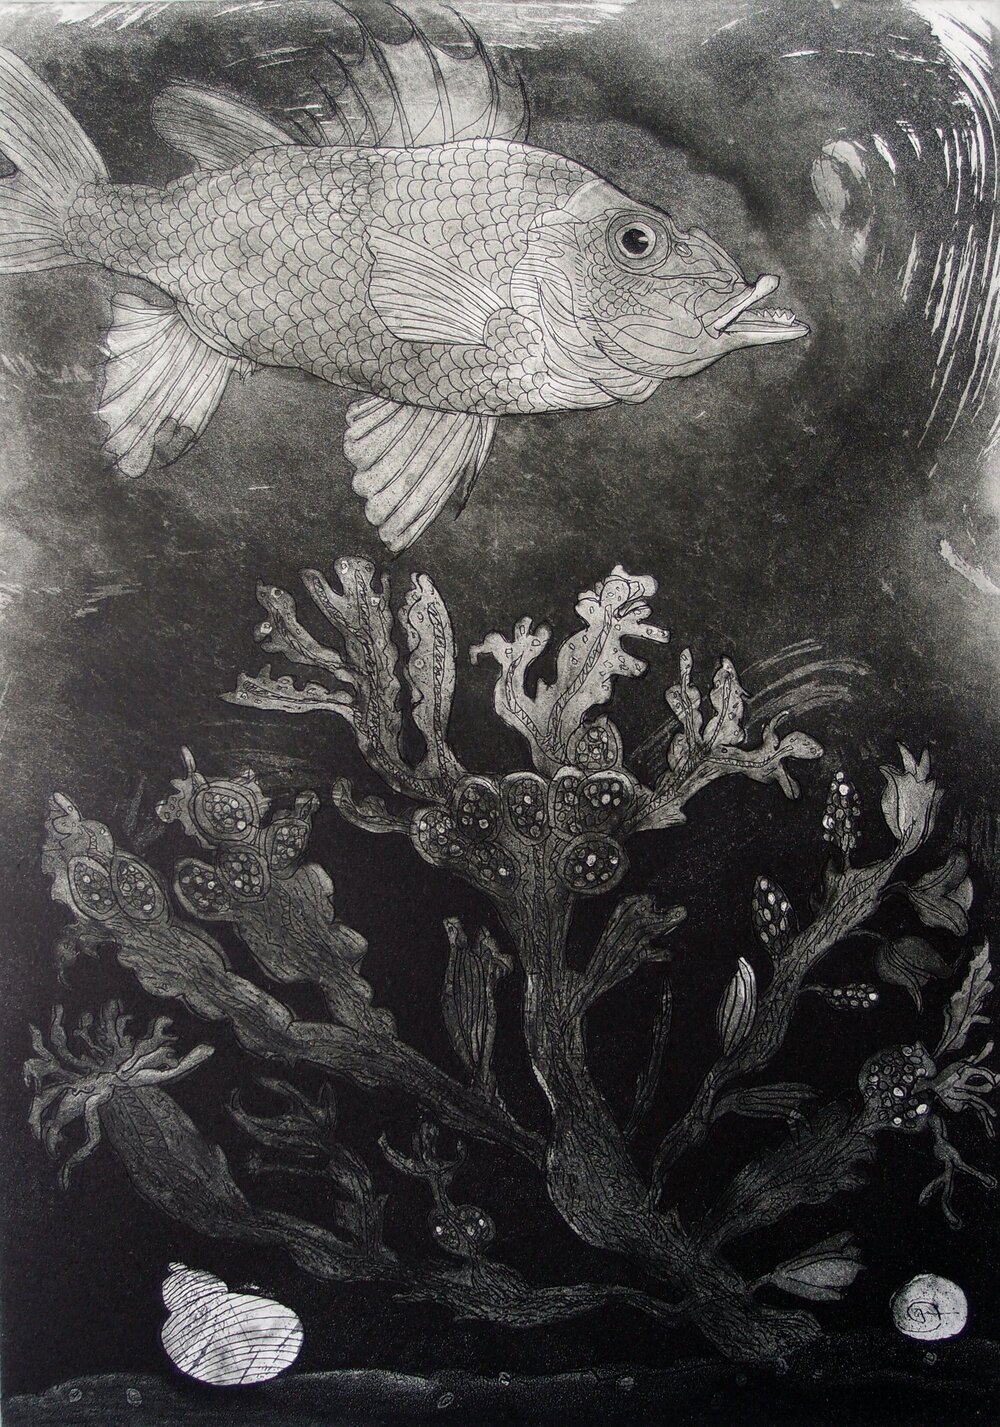 Deep Water © Roger Law, Etching, Edition 25, 61cm x 45cm £560 unframed